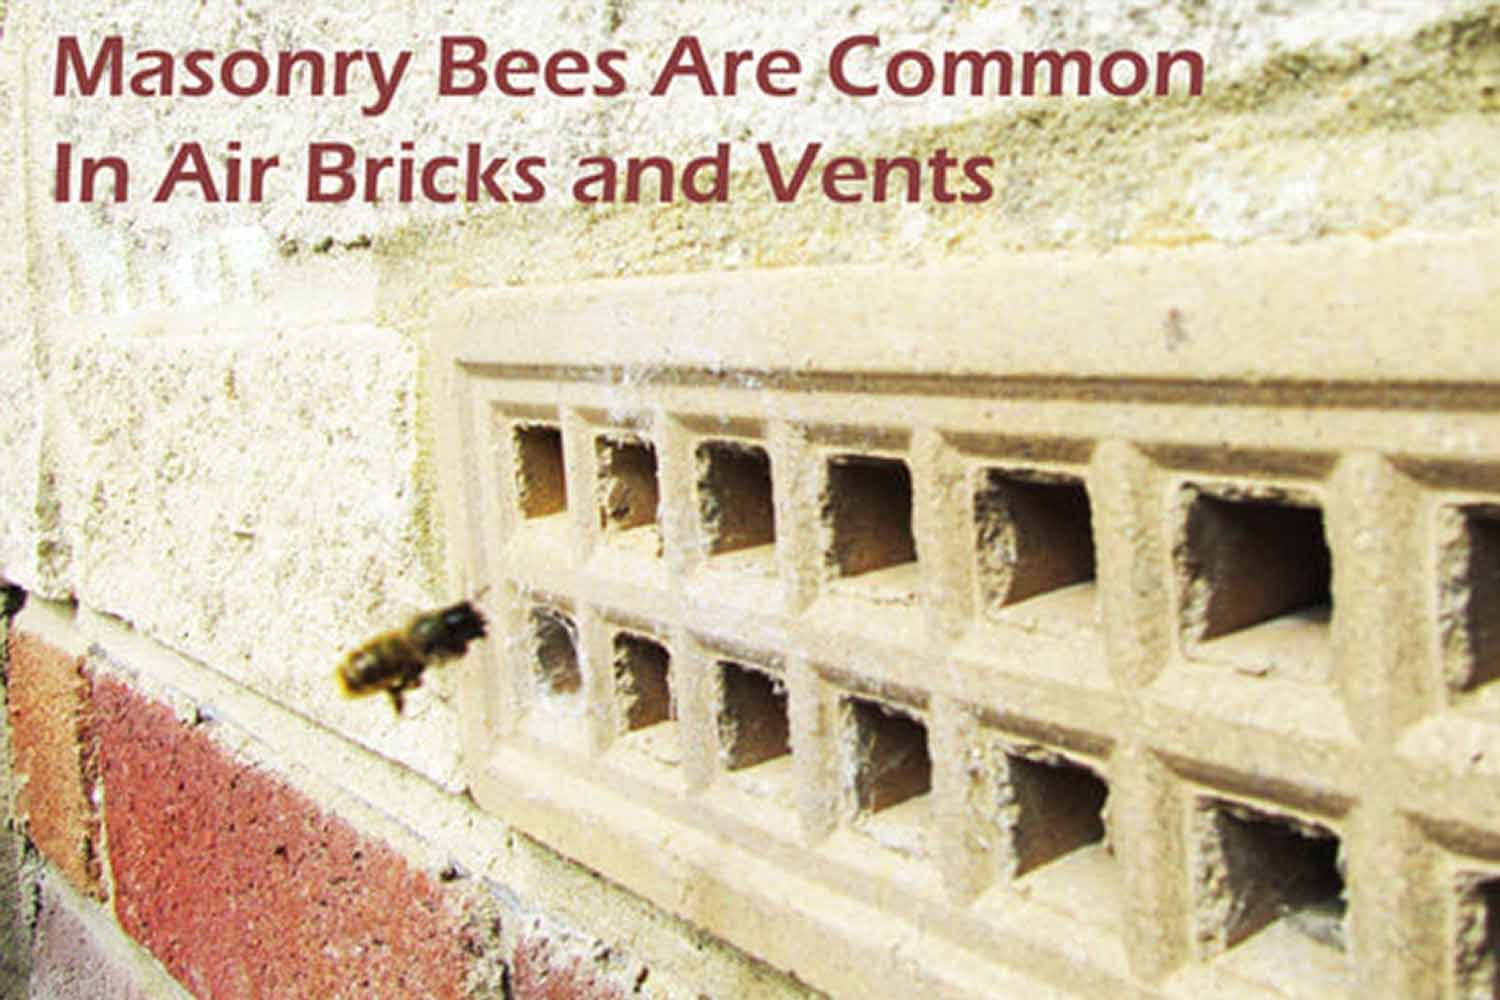 masonry bees are common in air bricks and vents